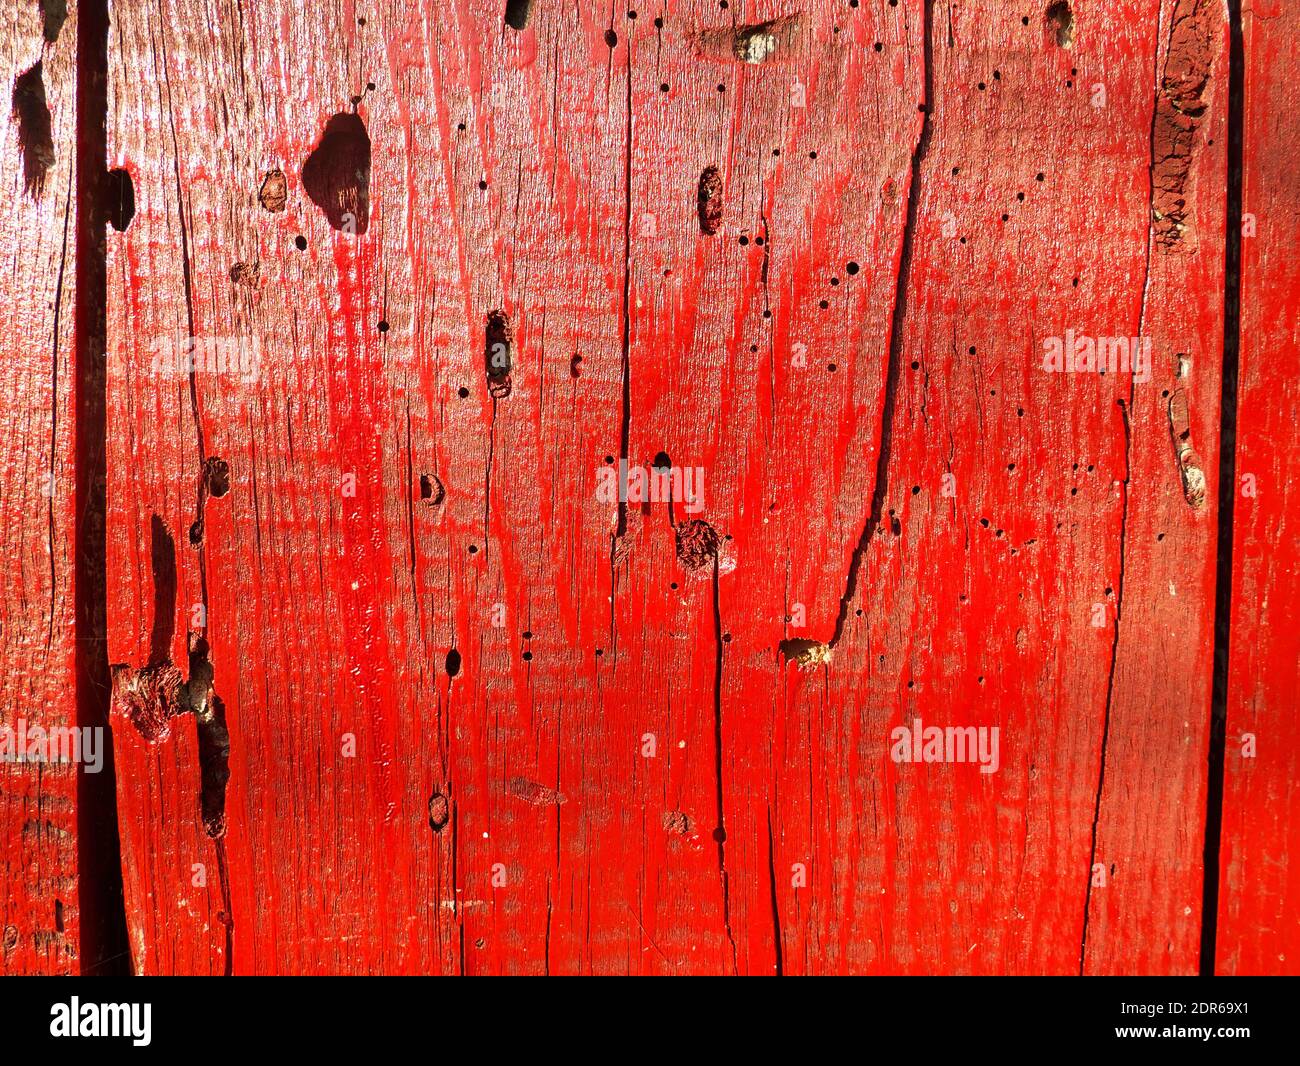 Texture of used wood planks painted red Stock Photo